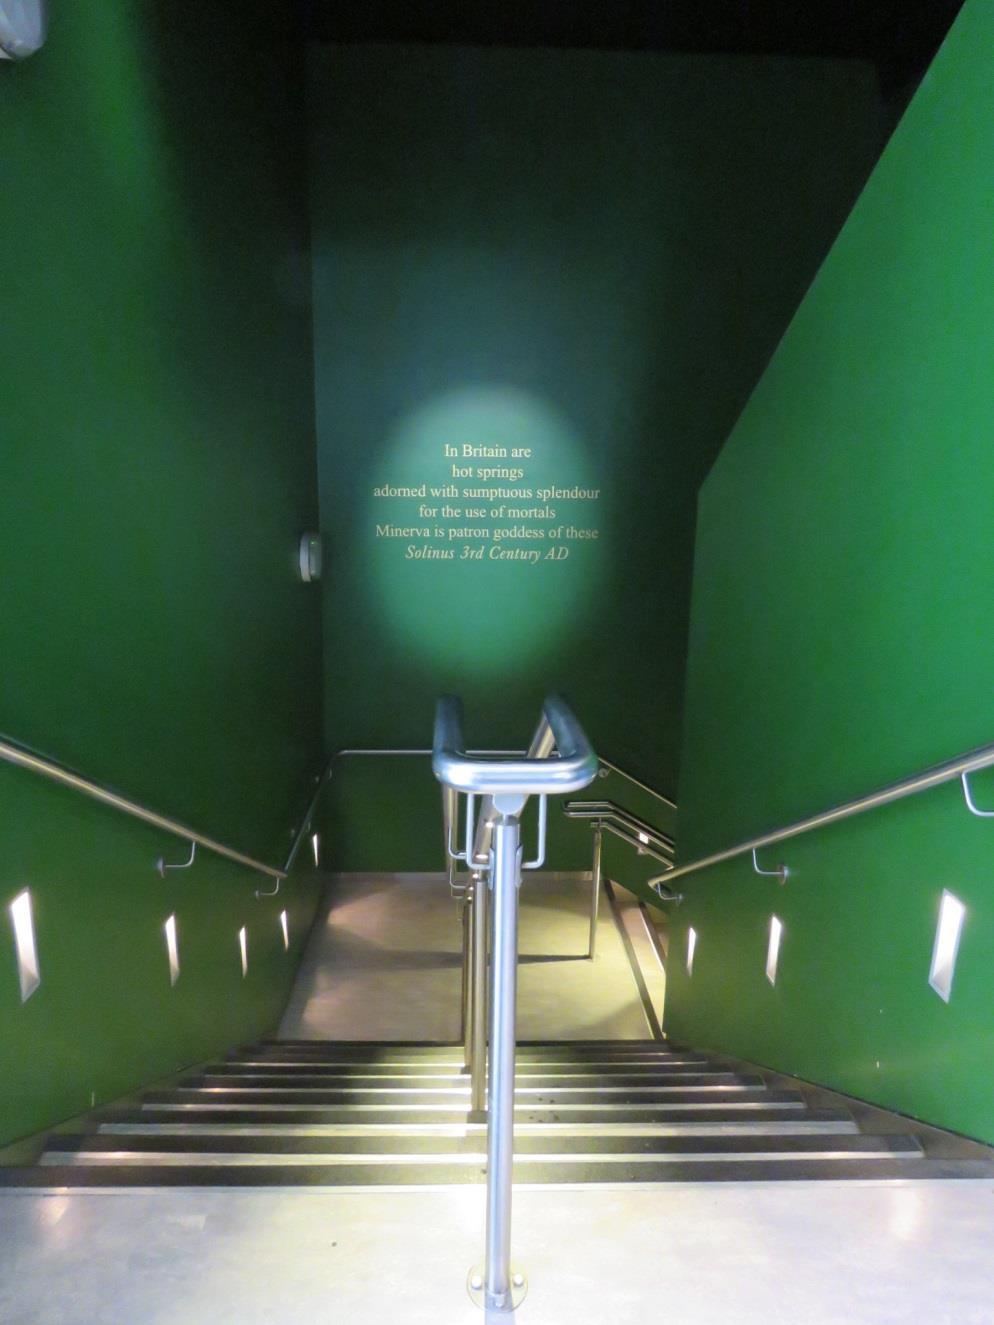 When I am ready, I will go down these stairs into the museum. The museum is underground.